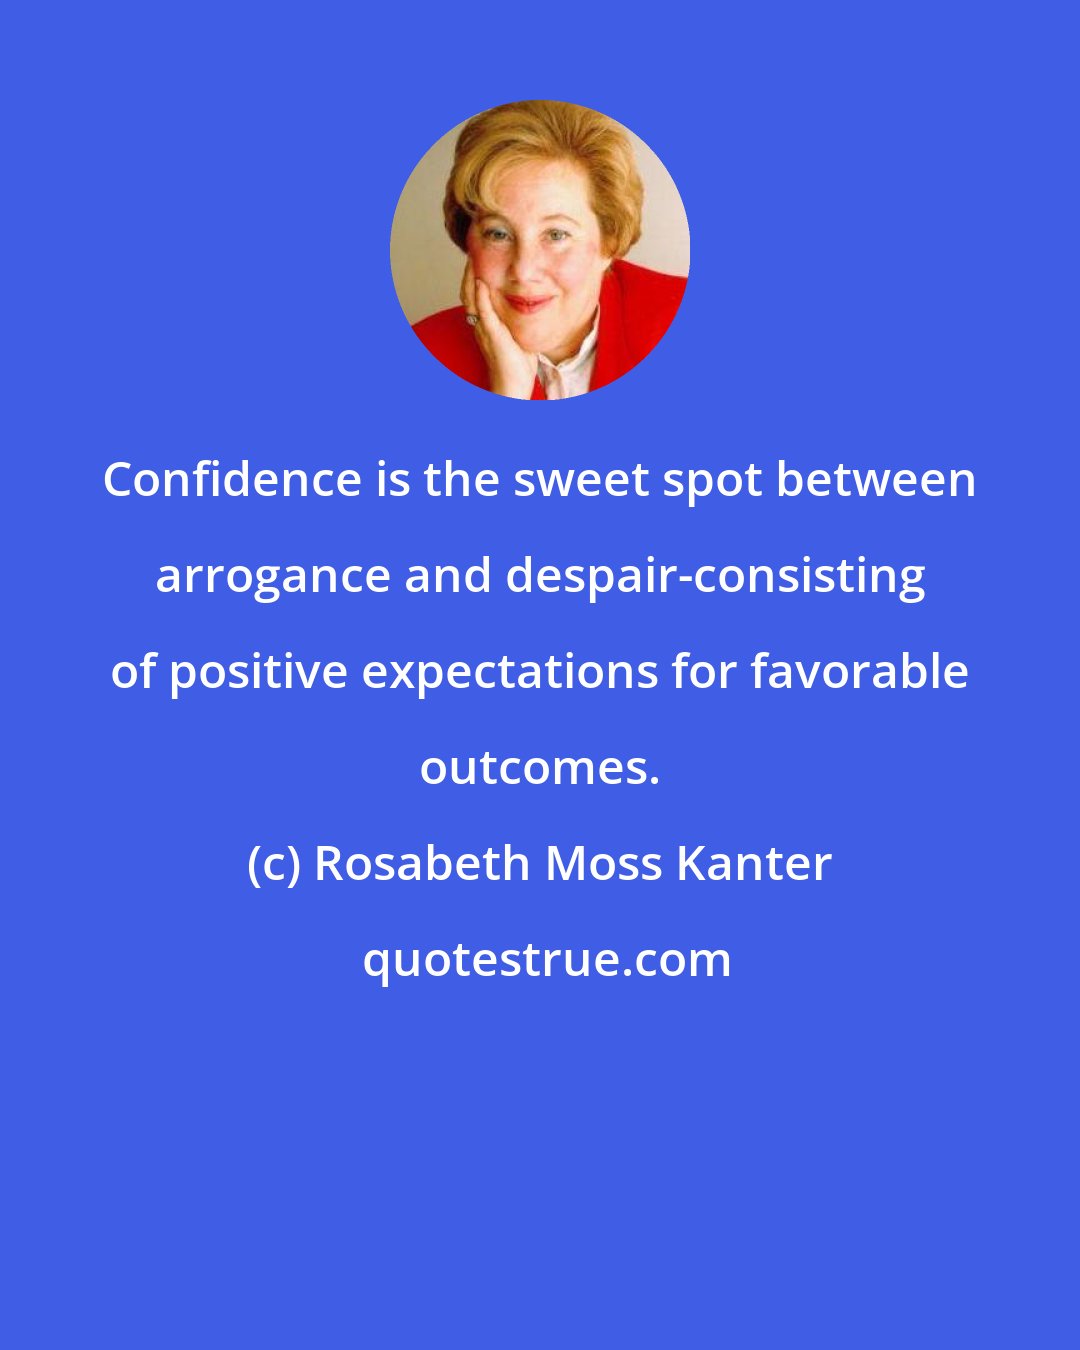 Rosabeth Moss Kanter: Confidence is the sweet spot between arrogance and despair-consisting of positive expectations for favorable outcomes.